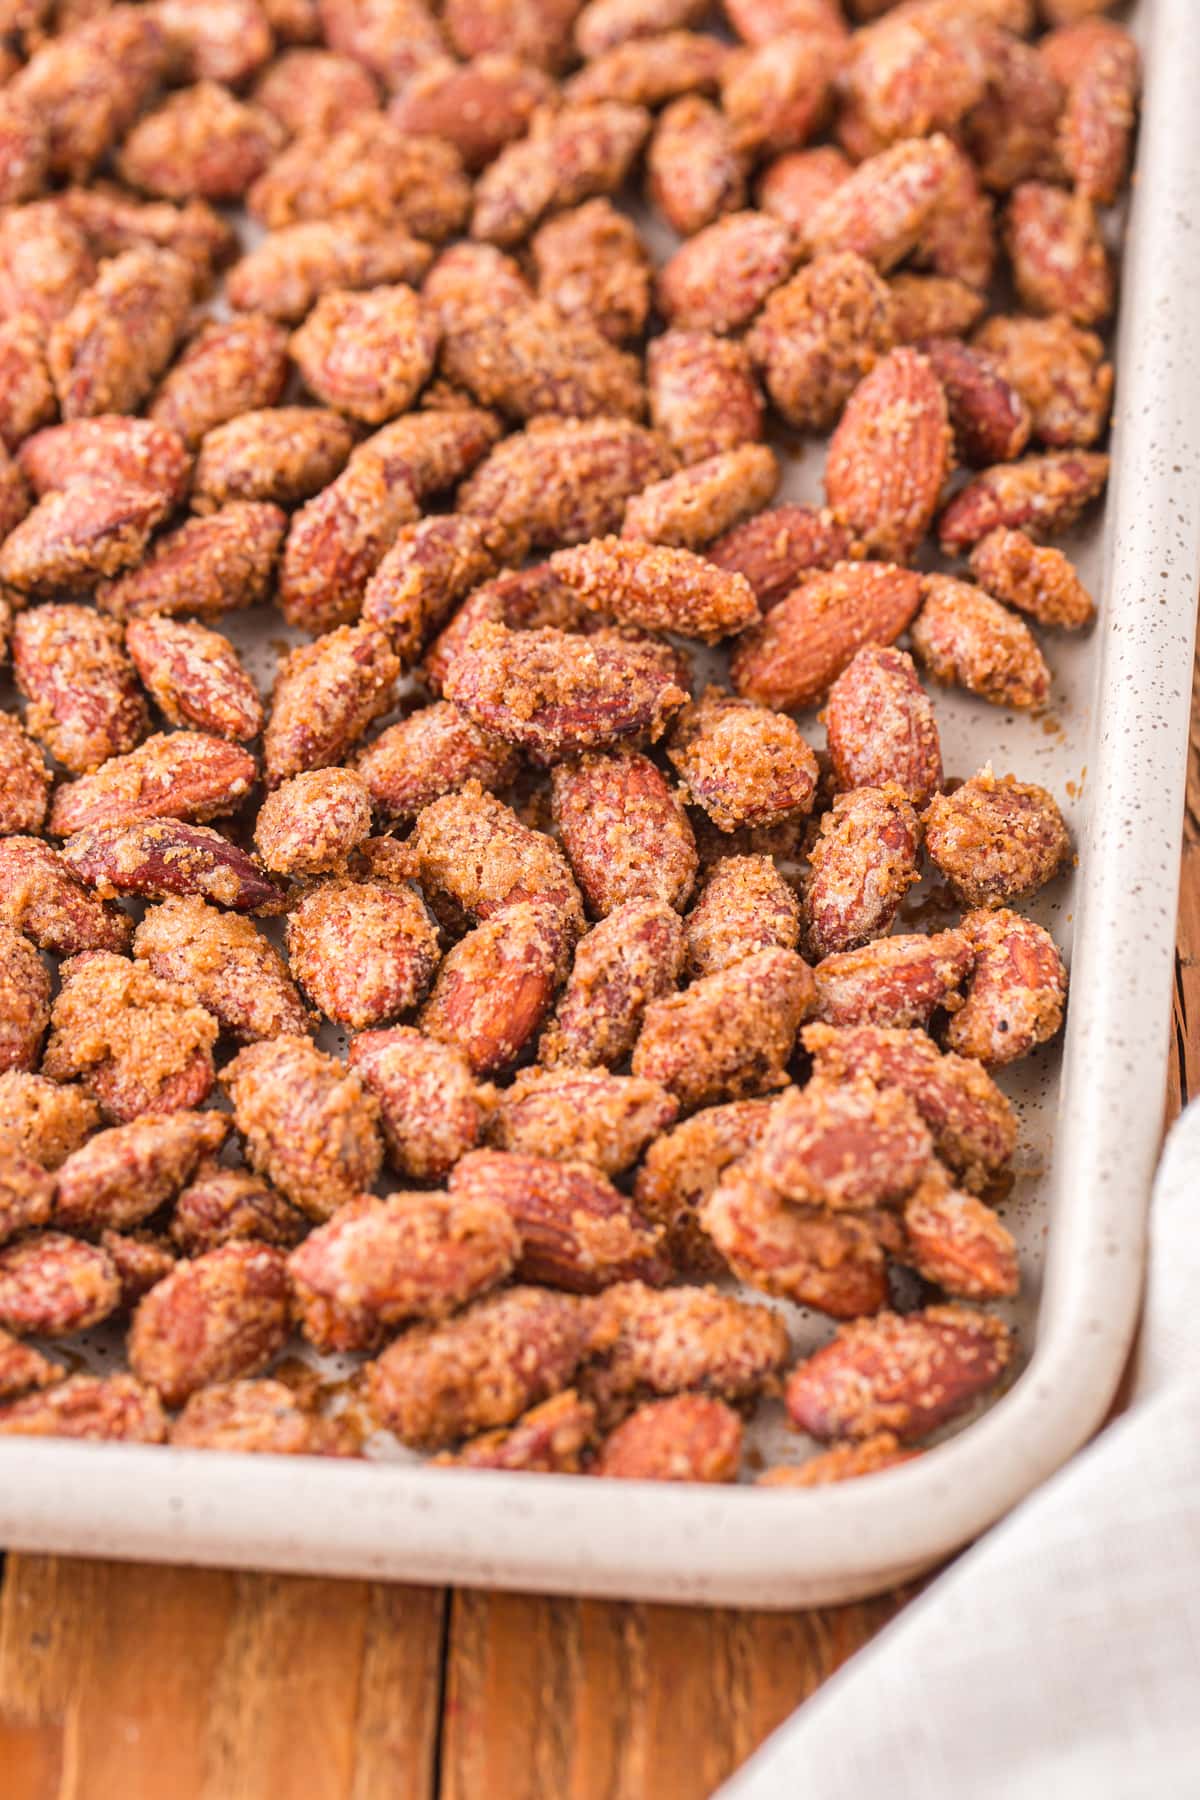 Roasted almonds on a baking sheet.